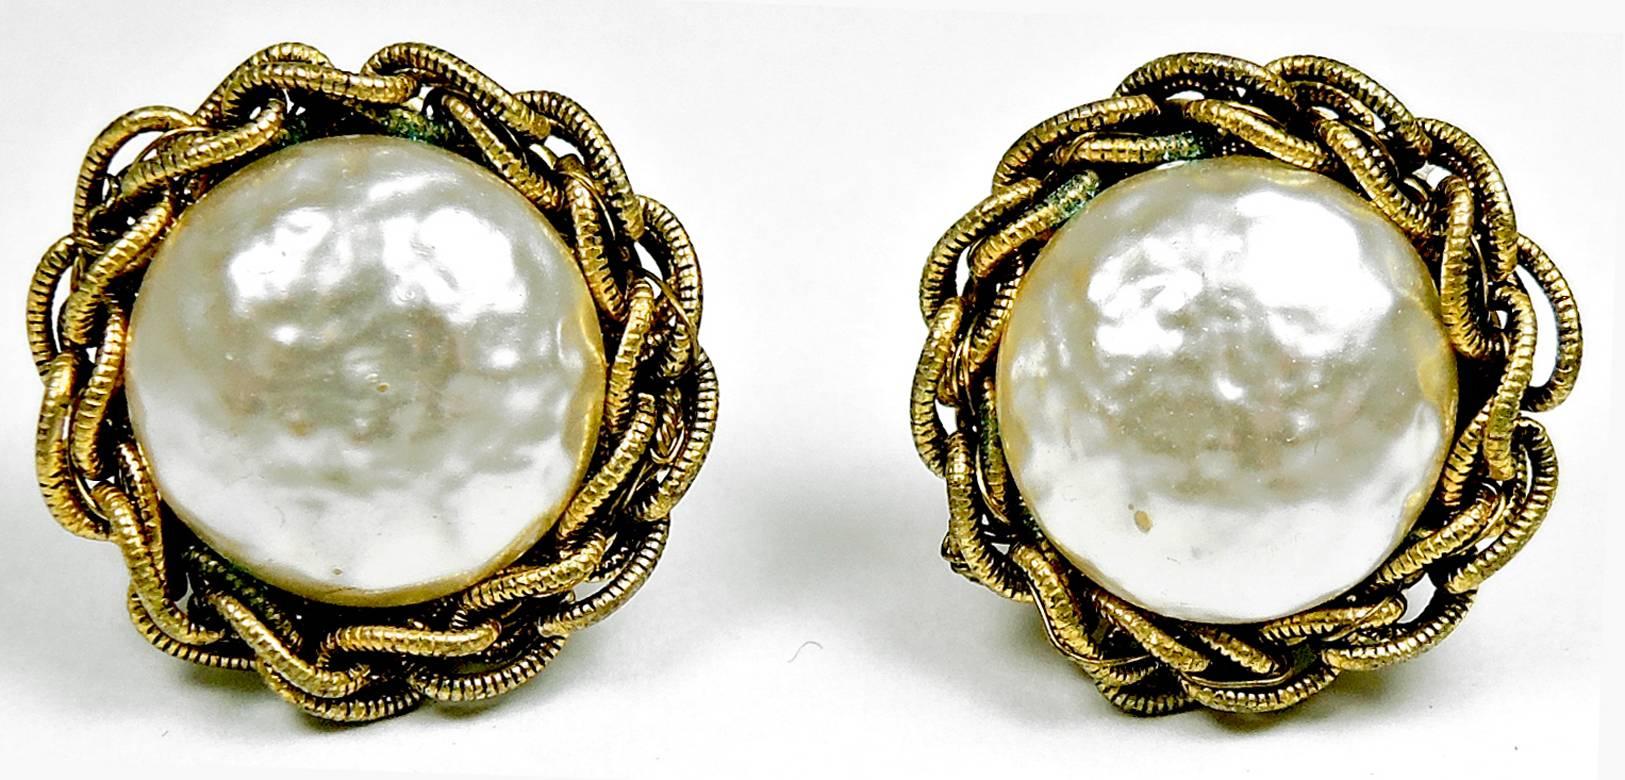 These are a pair of classic Miriam Haskell clip faux pearl button earrings. They are in an ornate braided brass tone setting and measure 1” x 1”. They are signed “Miriam Haskell” and are in excellent condition.